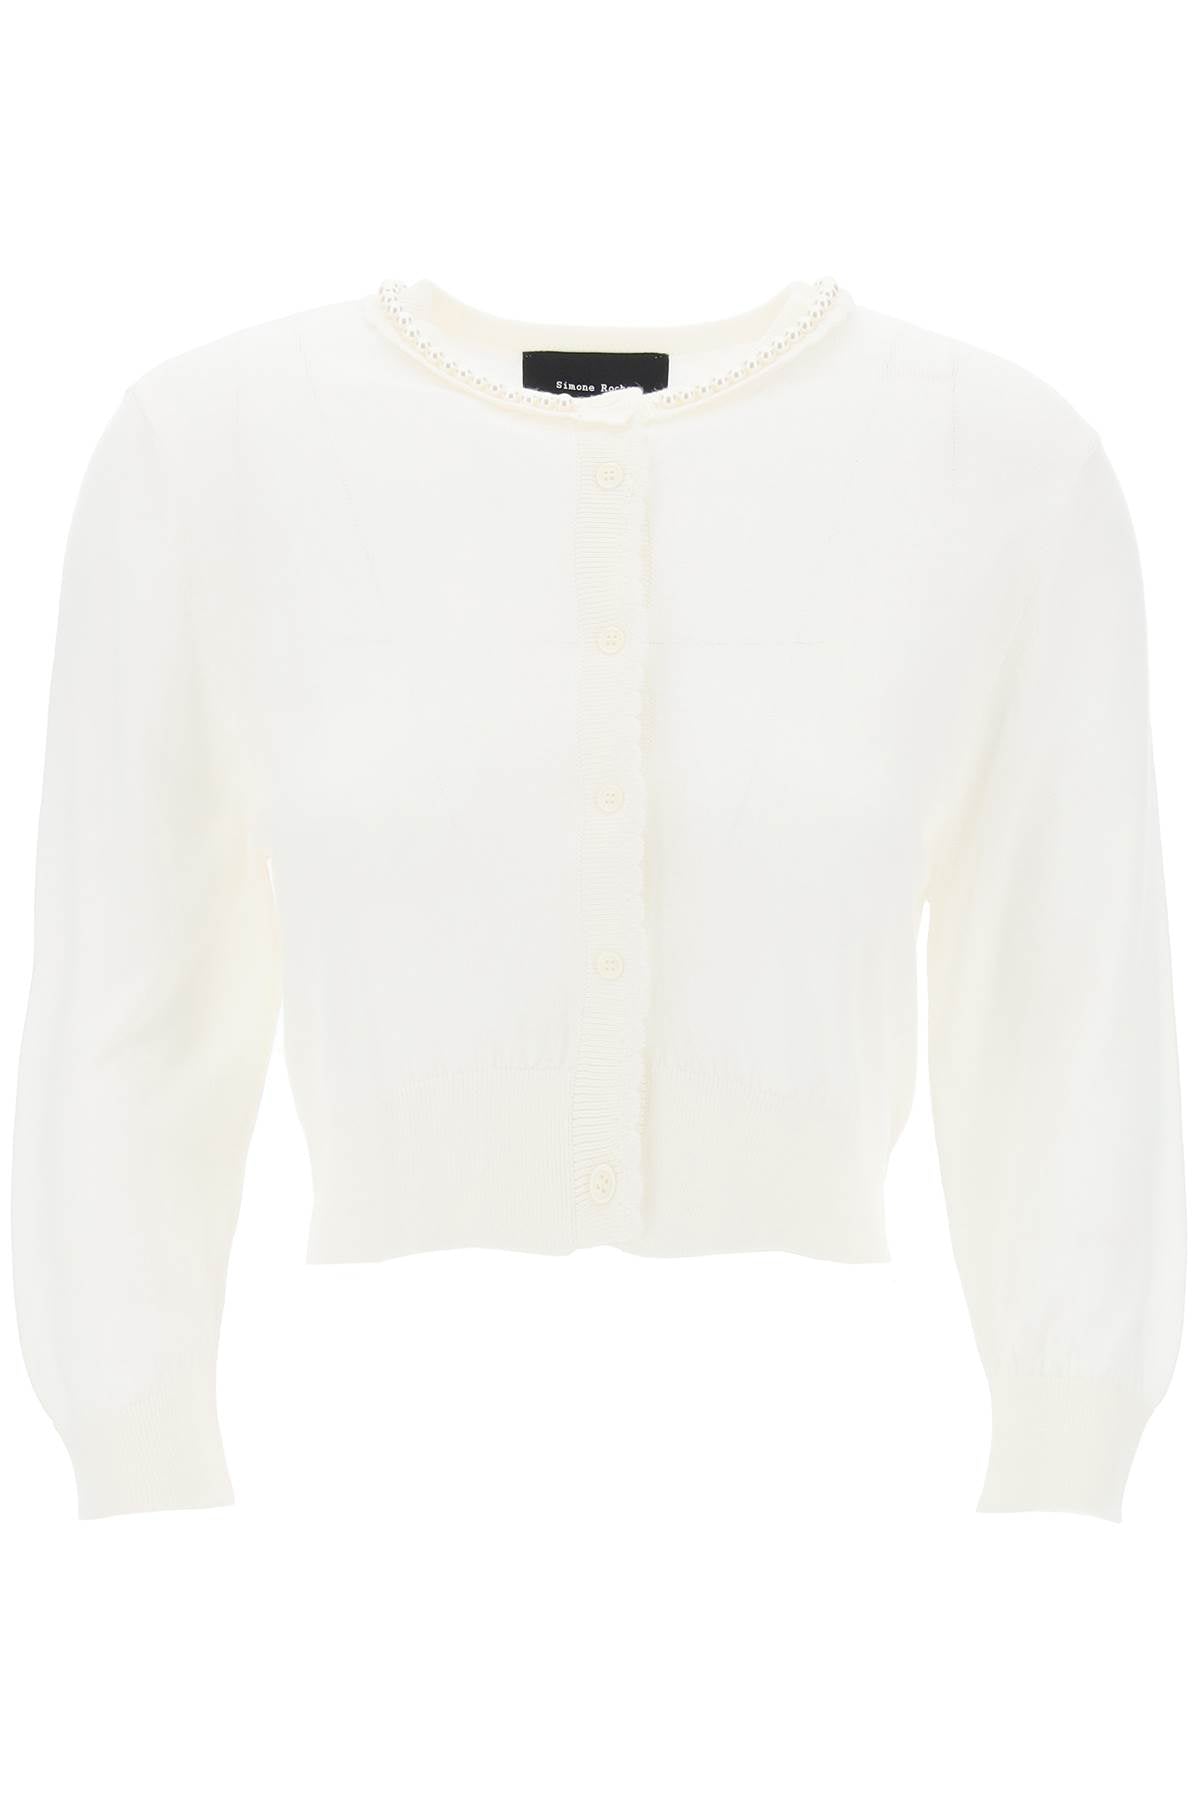 Simone rocha cropped cardigan with pearls-0